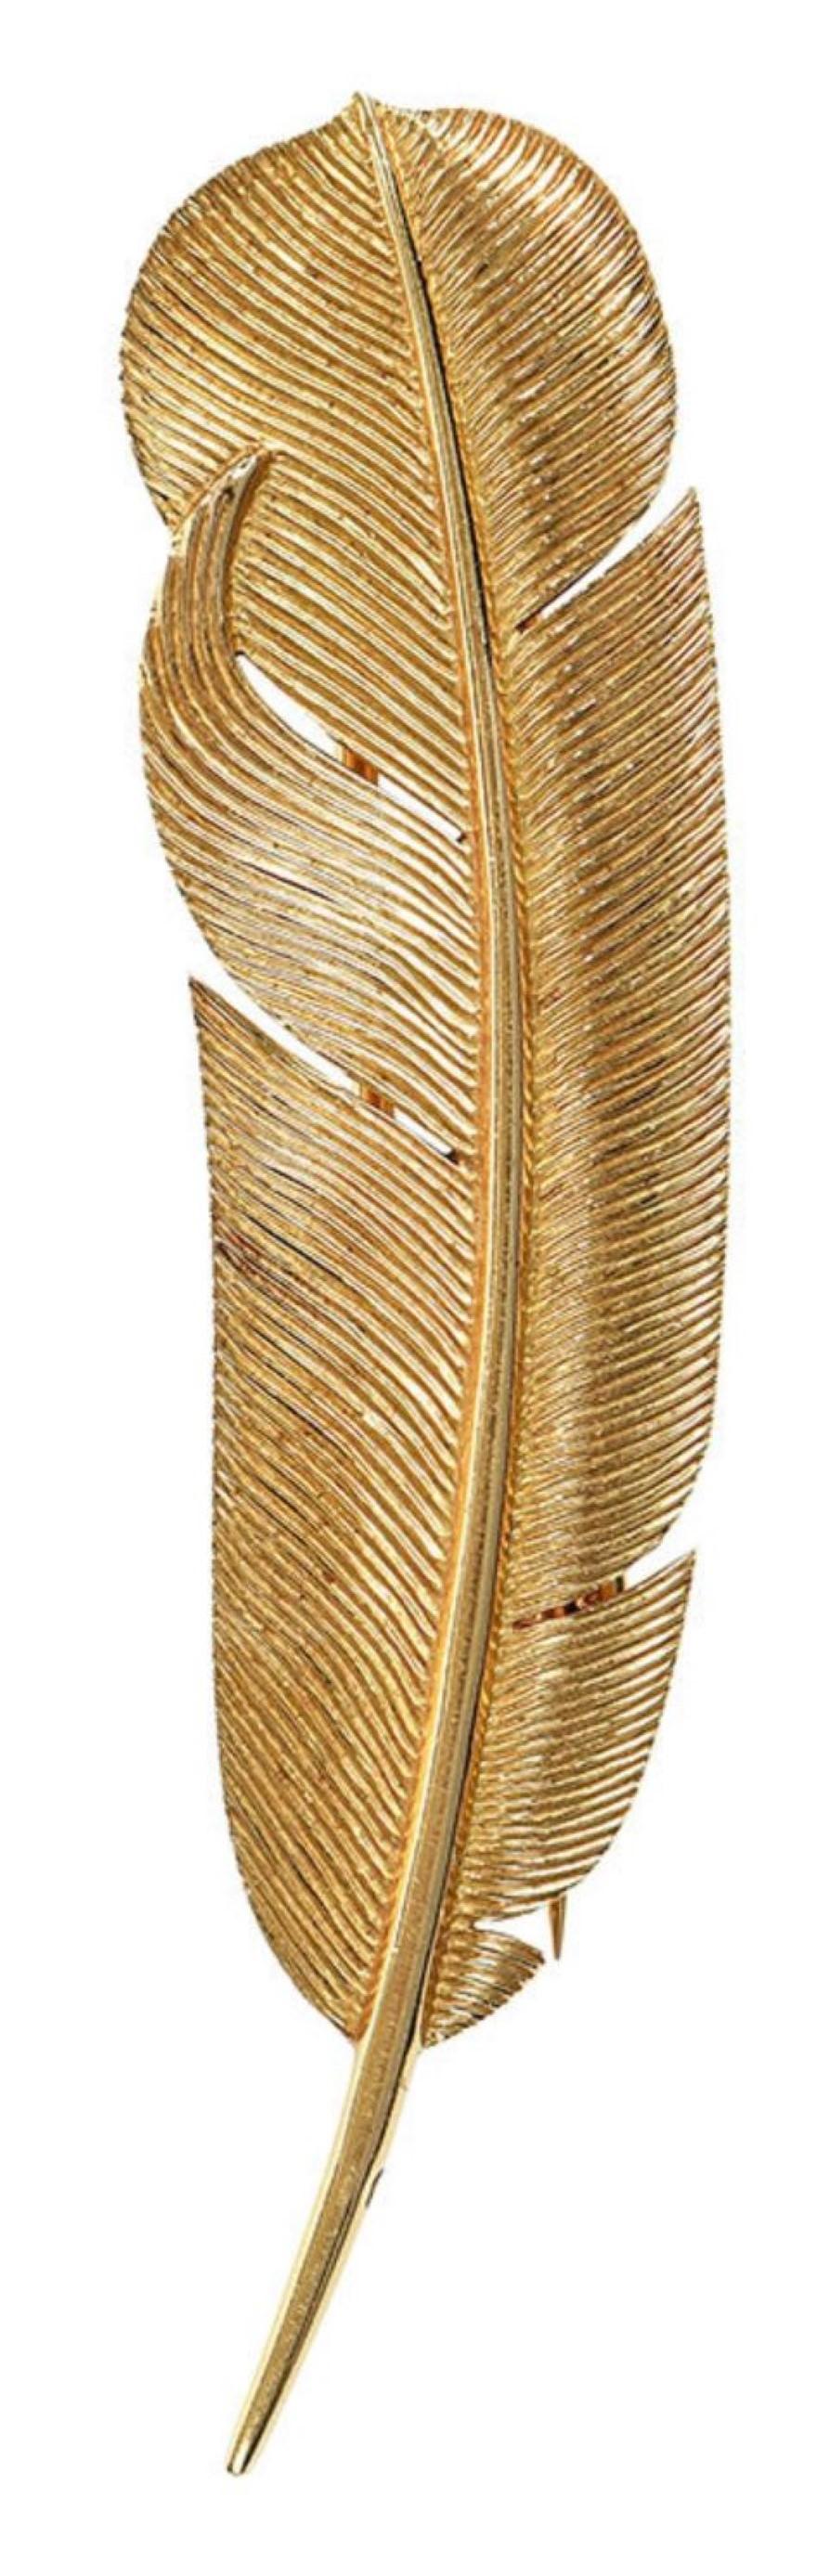 A vintage elegance and classy easy to wear vintage feather design brooch by Hermes. Crafted in 18K yellow gold. Signed Hermes Paris, 49662. stamped Depose, SSM. Eagle head hall mark.

Measured 2.63